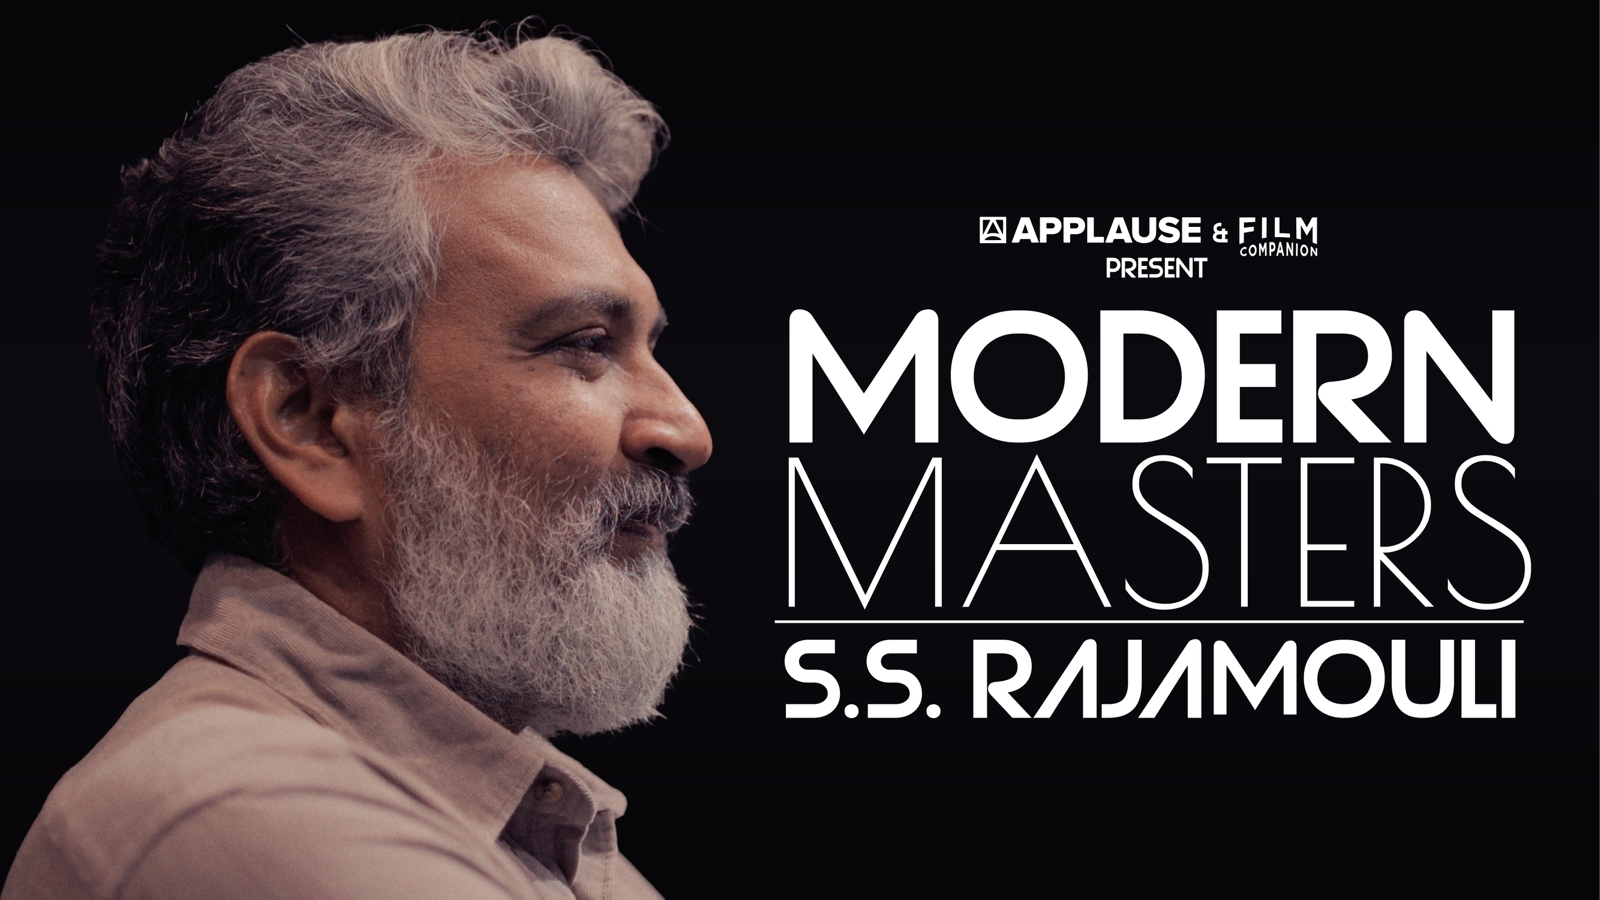 Witness the inspiring story of S.S. Rajamouli in a new docu-series ‘Modern Masters’*